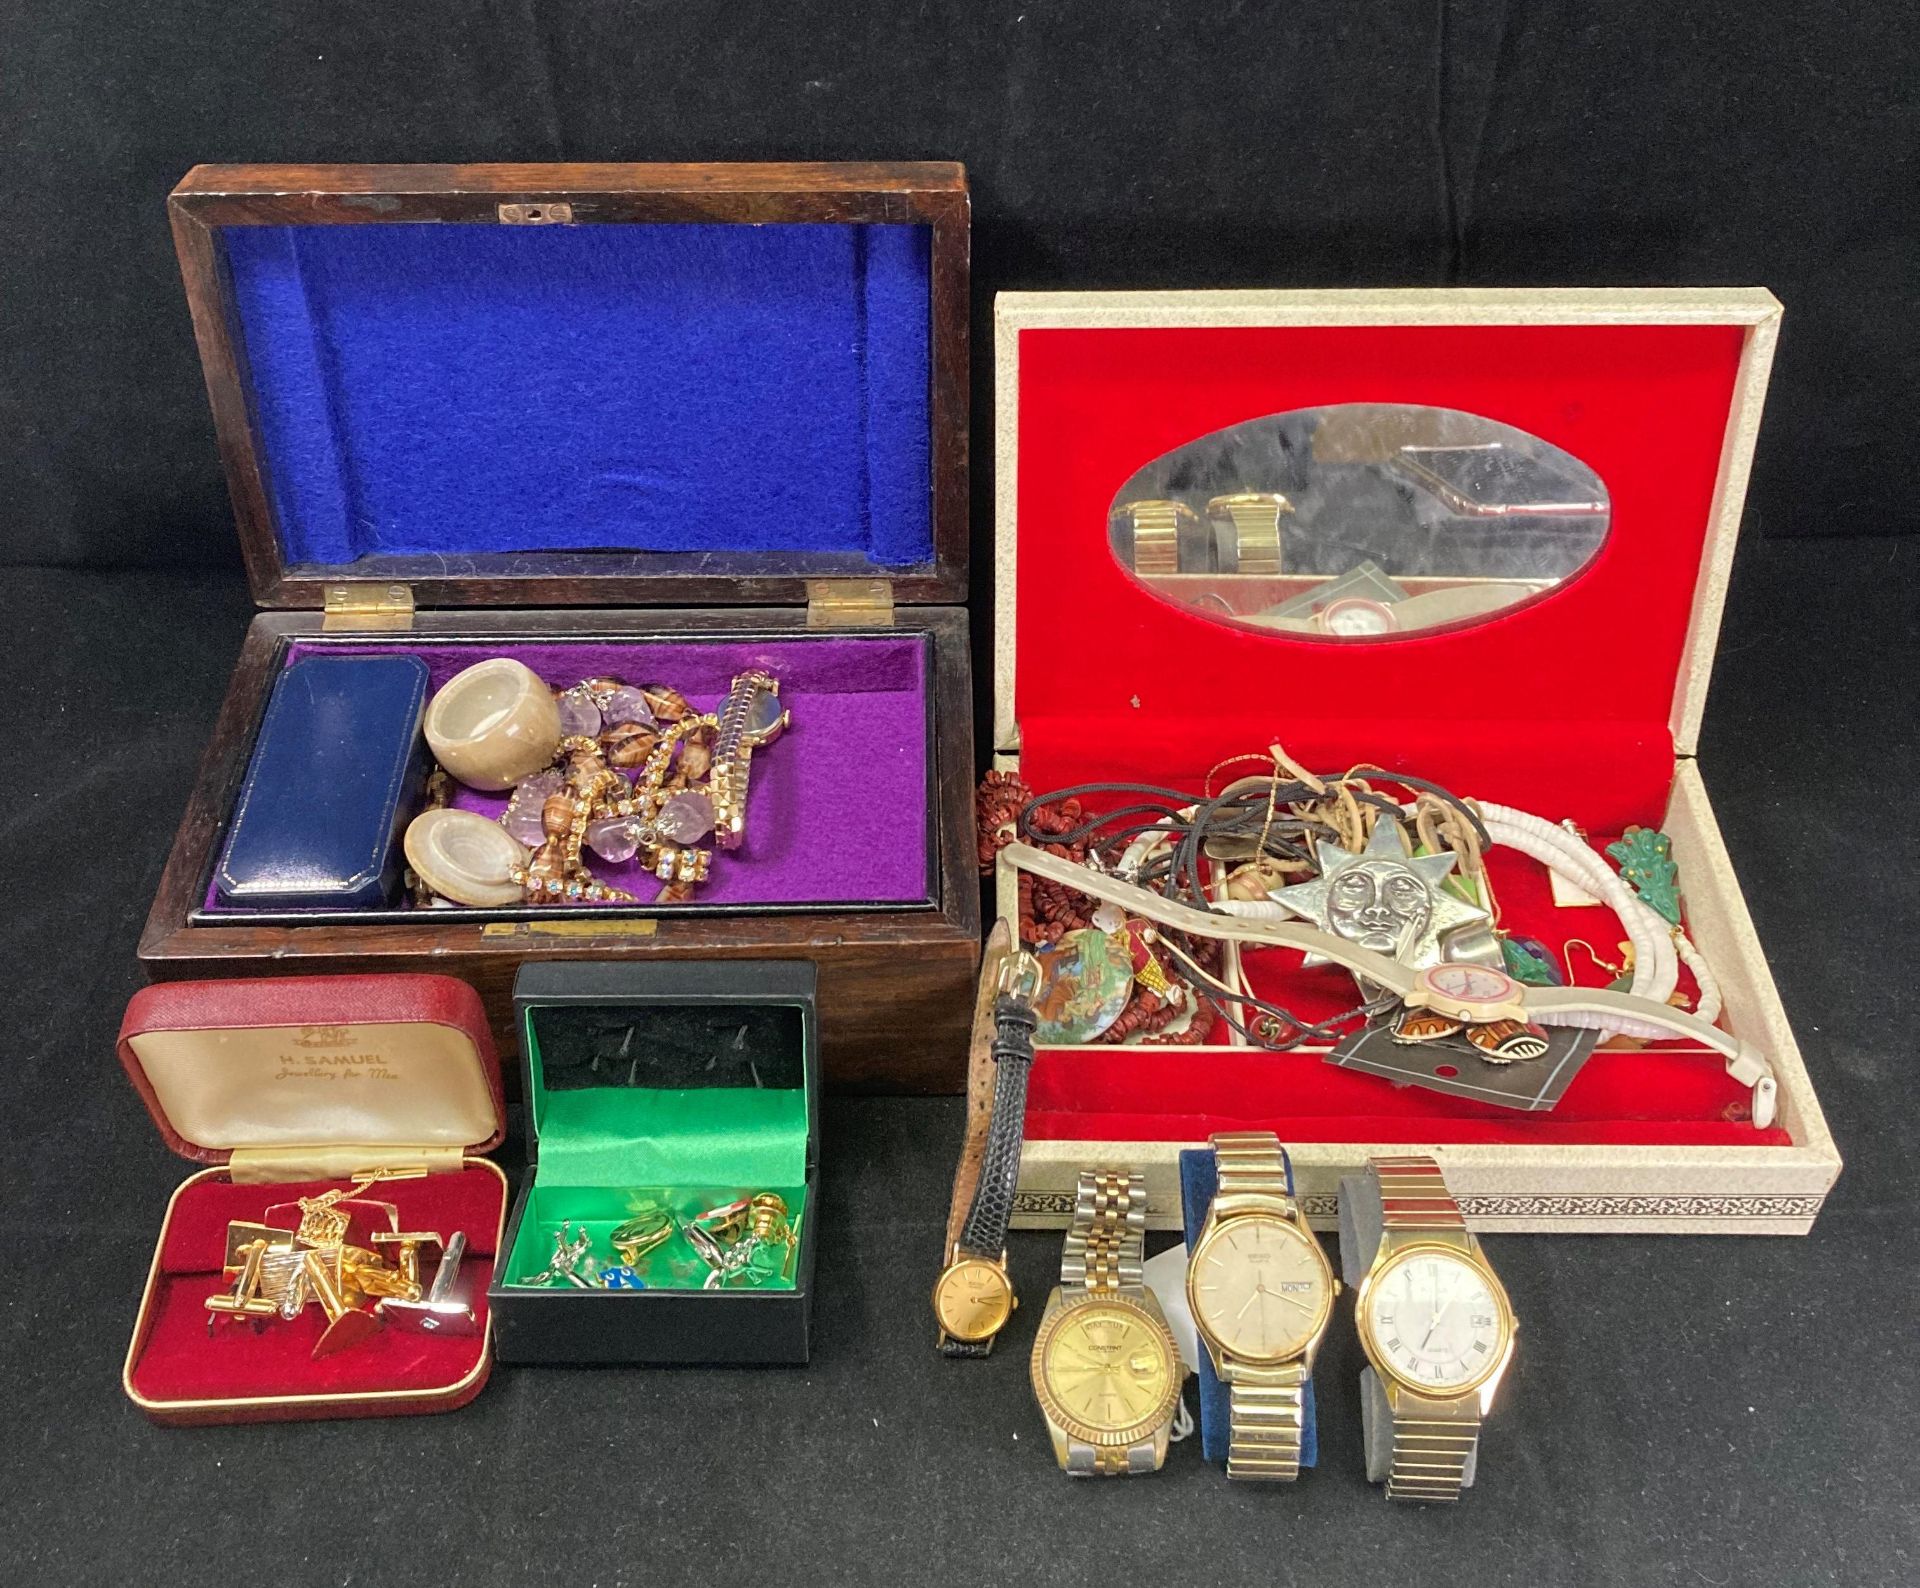 Contents to box and jewellery boxes - assorted costume jewellery, cameo brooch, earrings, bracelets,